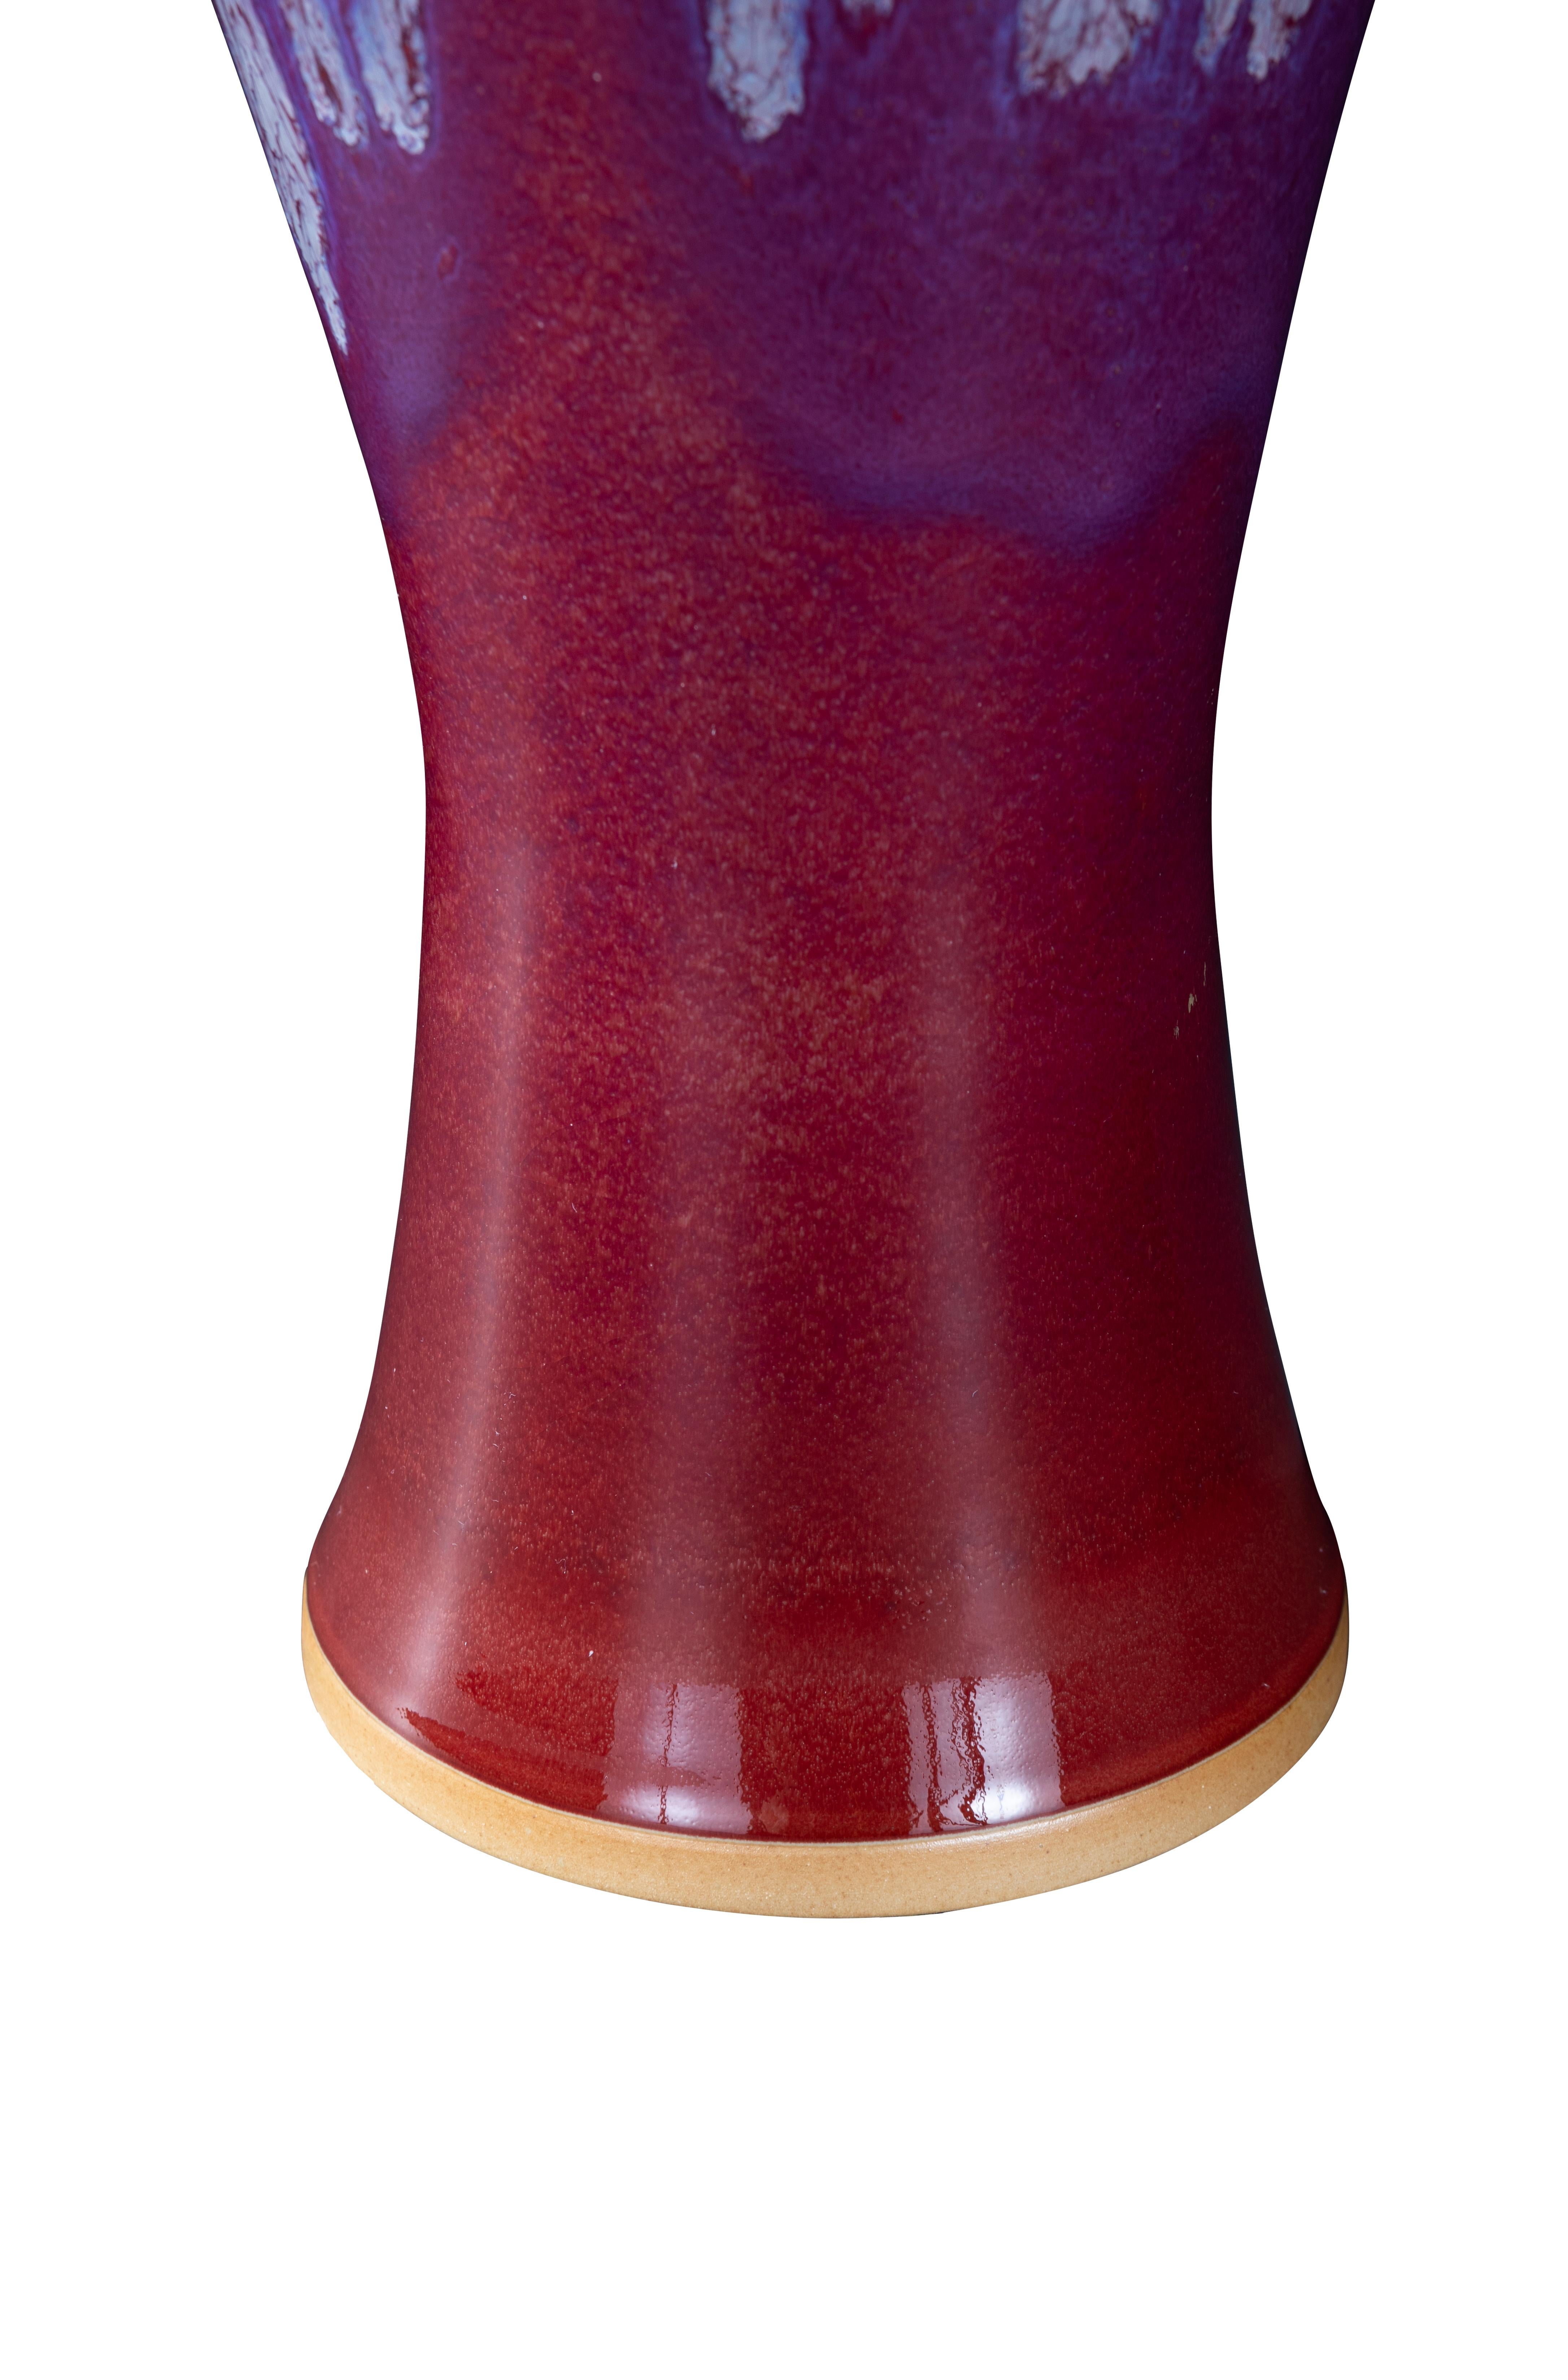 Ceramic Pinched Neck Variegated Vase in Ox-blood and Pink Drip Glaze In Good Condition For Sale In Dallas, TX